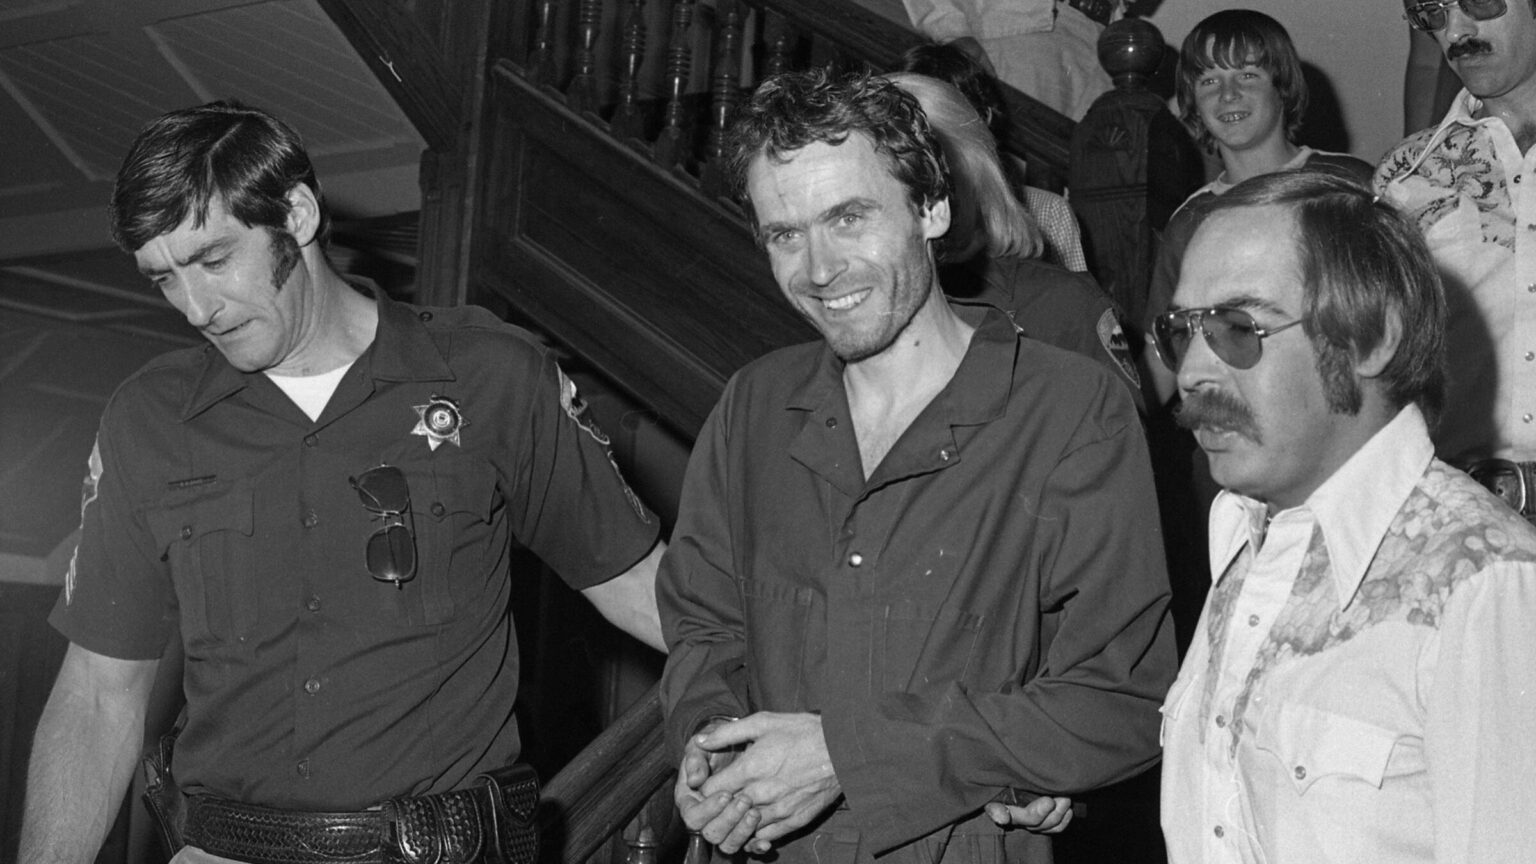 Several movies have been made about Ted Bundy, the man who killed women across the United States. Why is Hollywood obsessed?